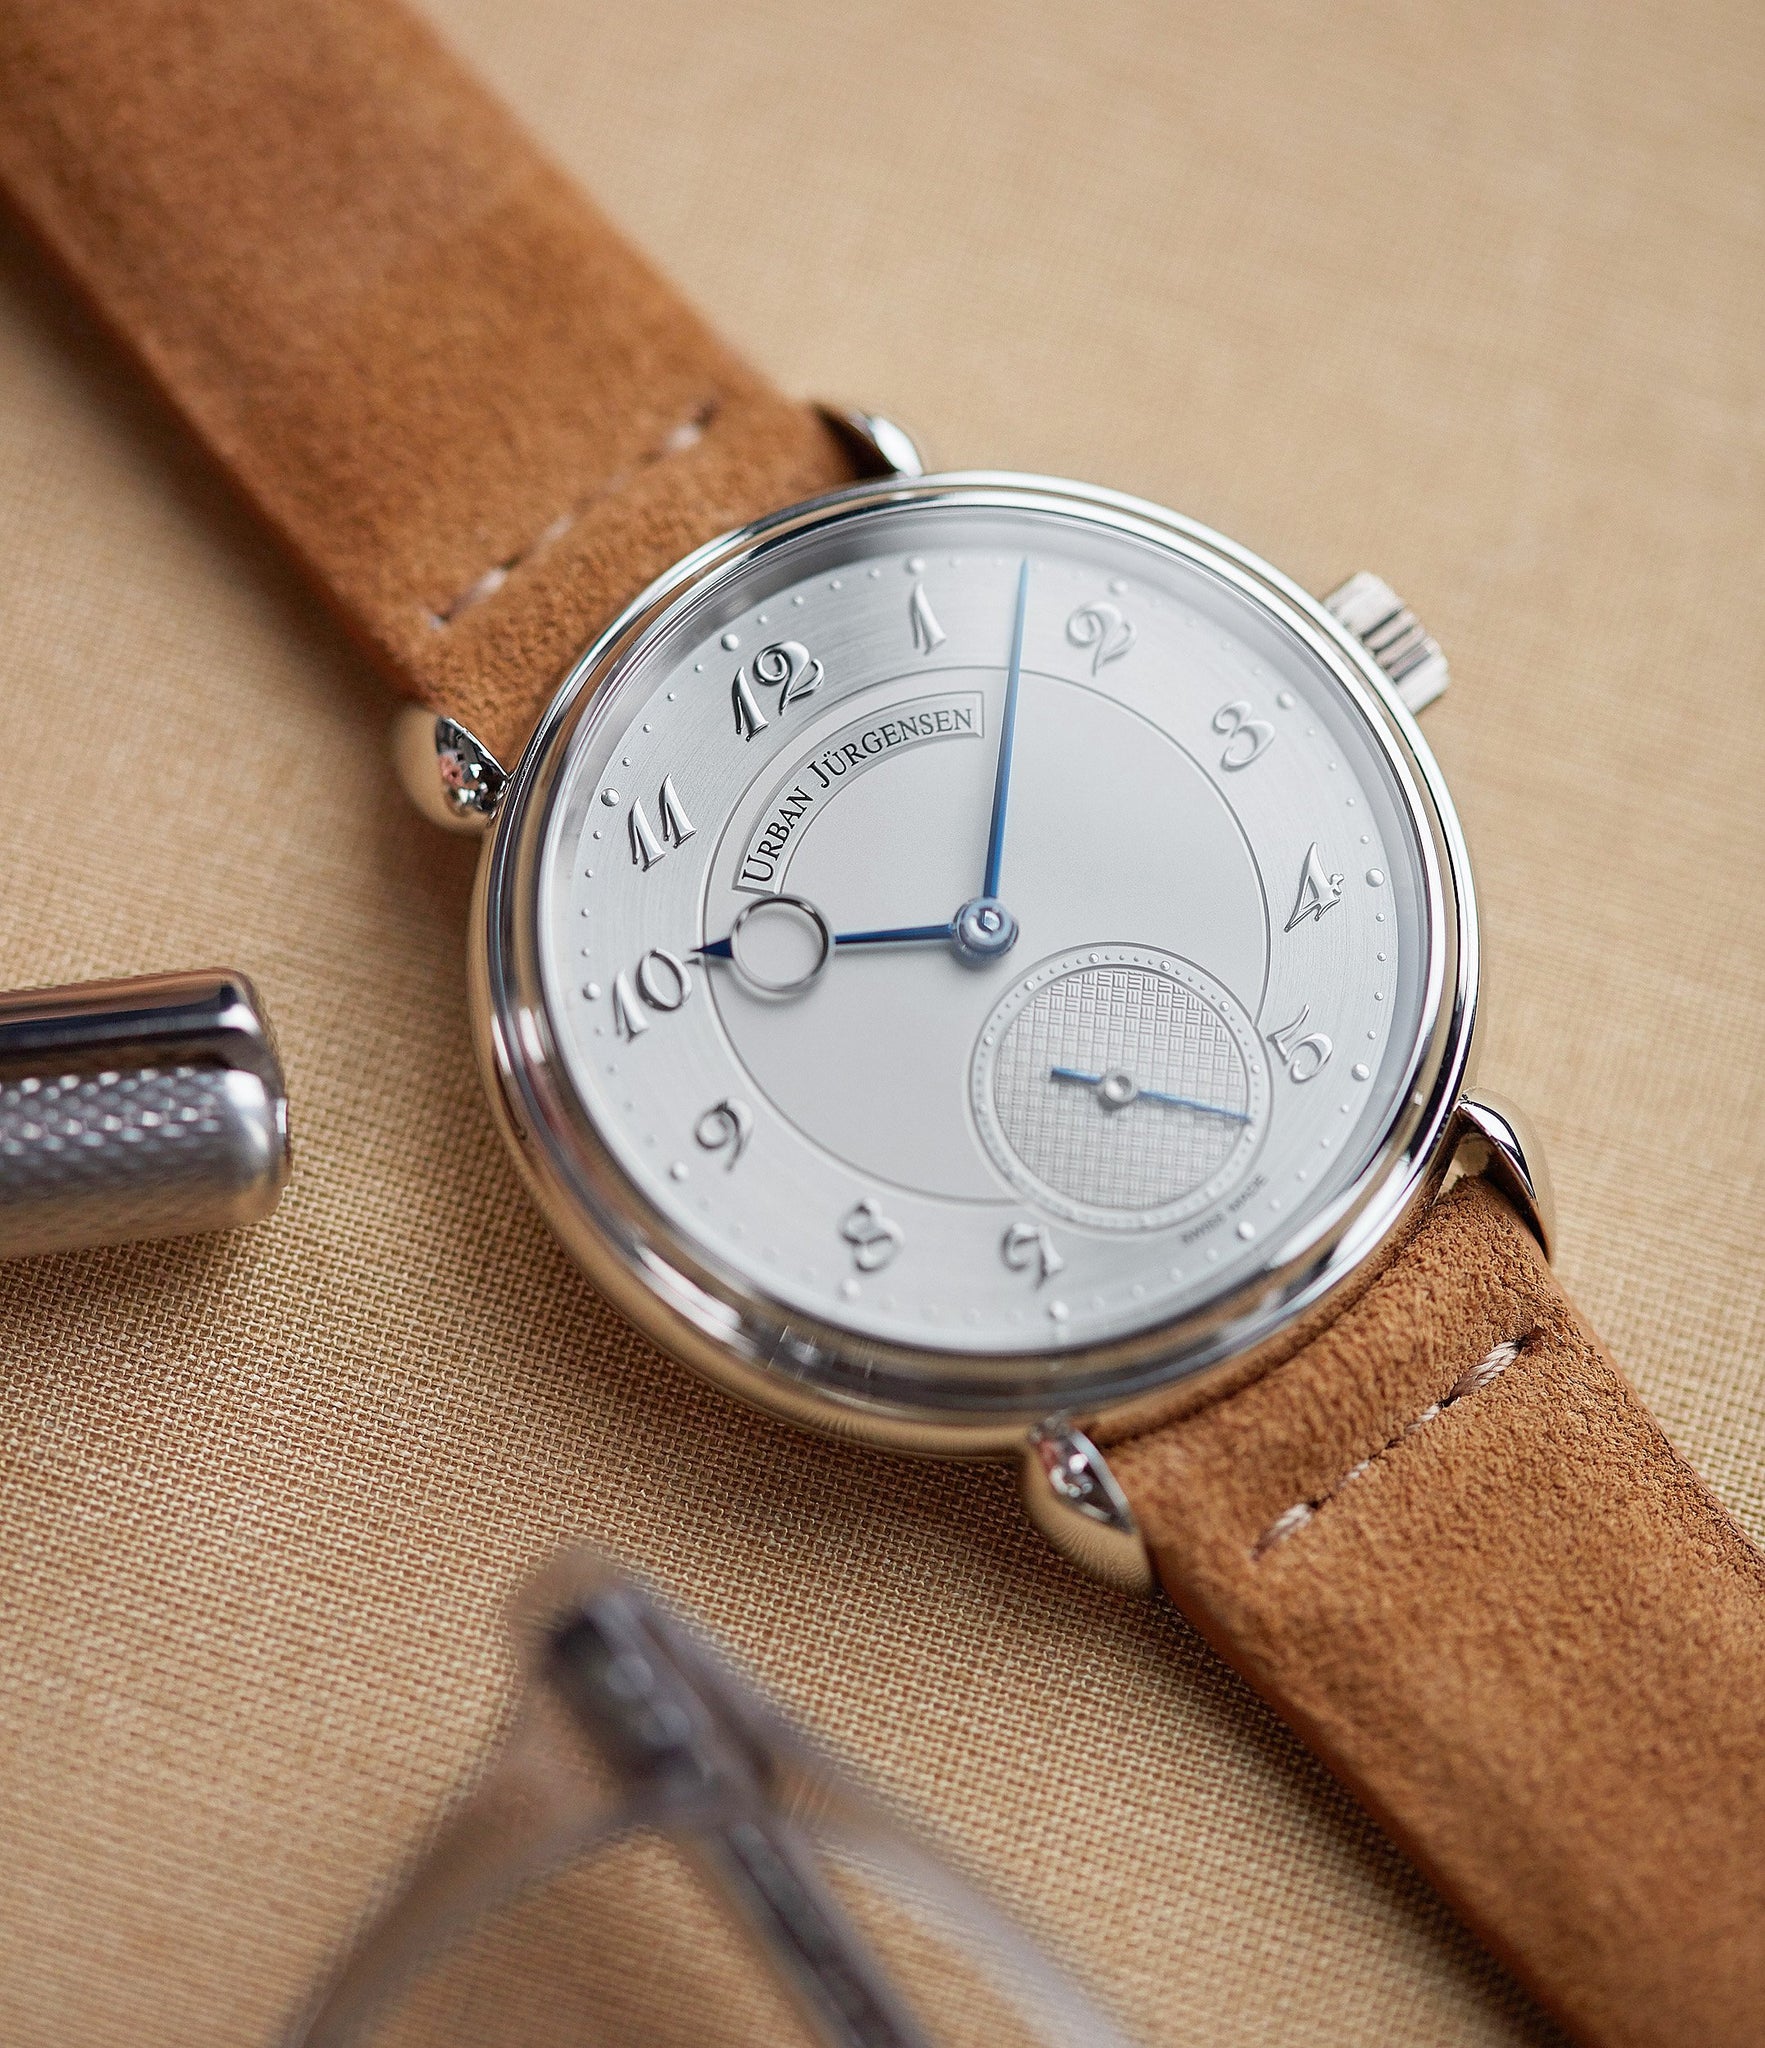 Shop Barcelona JPM watch strap Urban Jurgensen tan suede quick-release springbars buckle handcrafted European-made for sale online at A Collected Man London